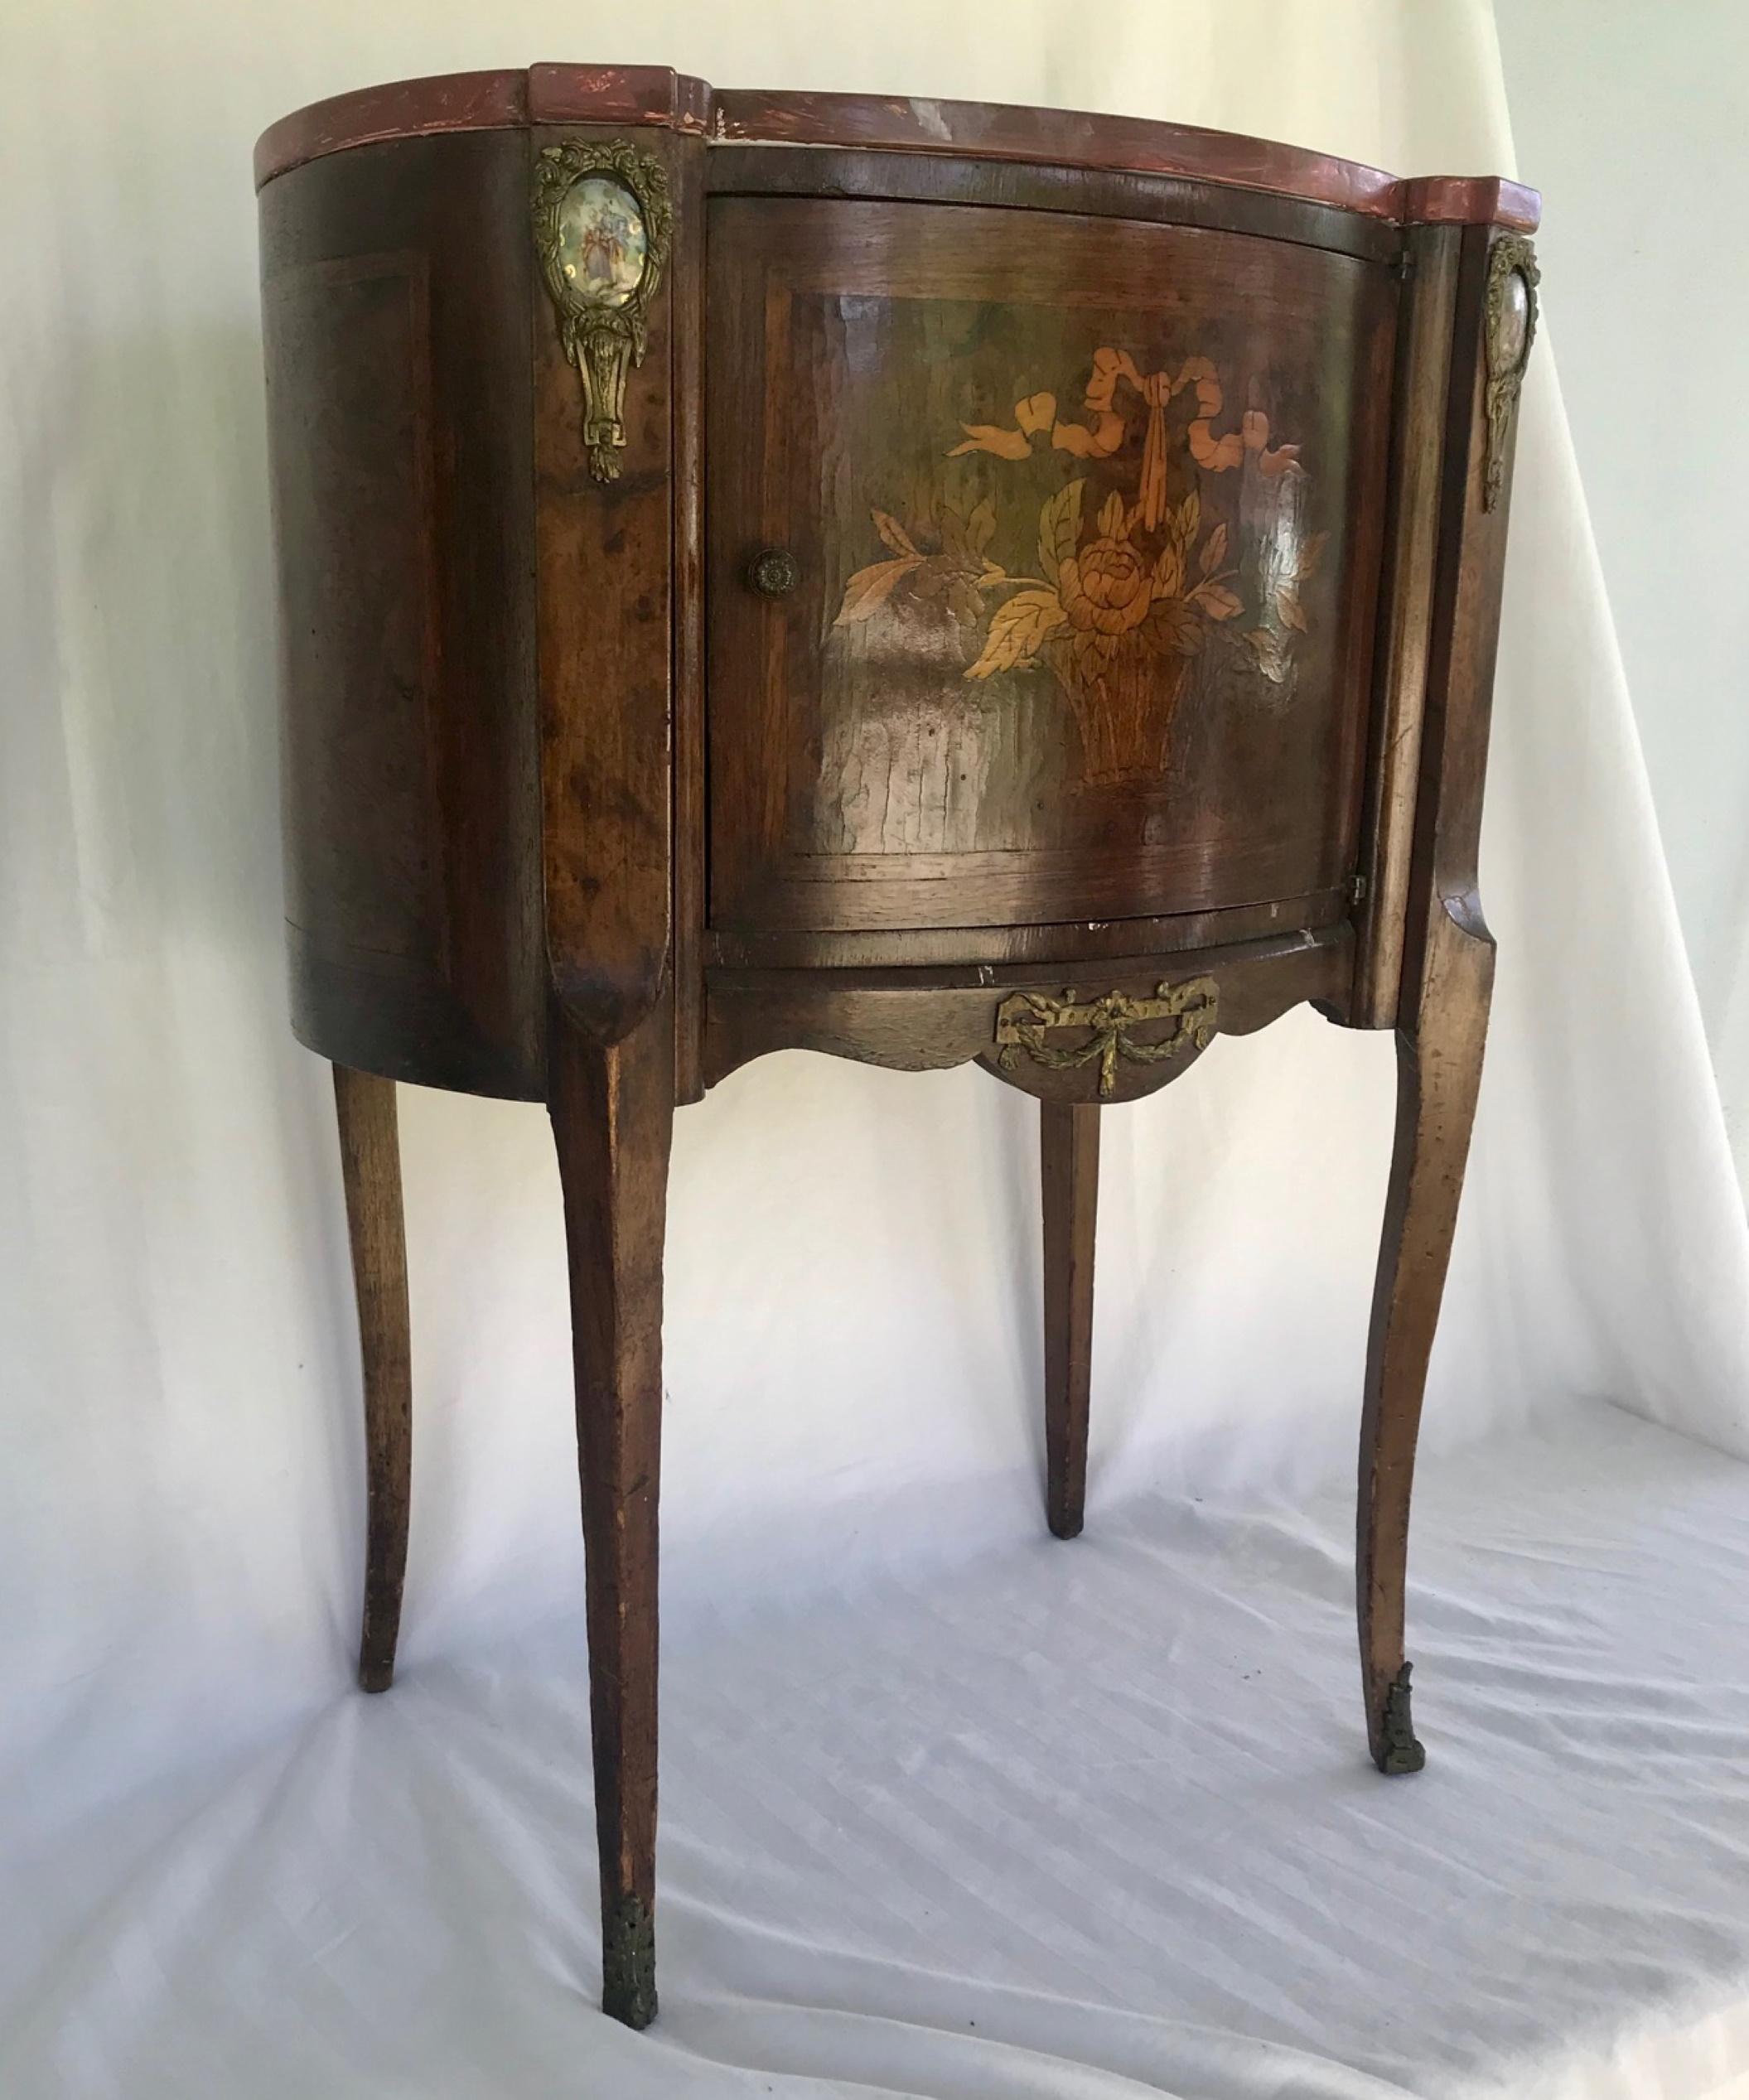 19th century Louis XV style rosewood marquetry bronze ormolu side table nightstand

Beautiful Louis XV style bedside table with serpentine front door in fine rosewood veneer and flower marquetry. Slender and graceful cabriole legs are fitted with